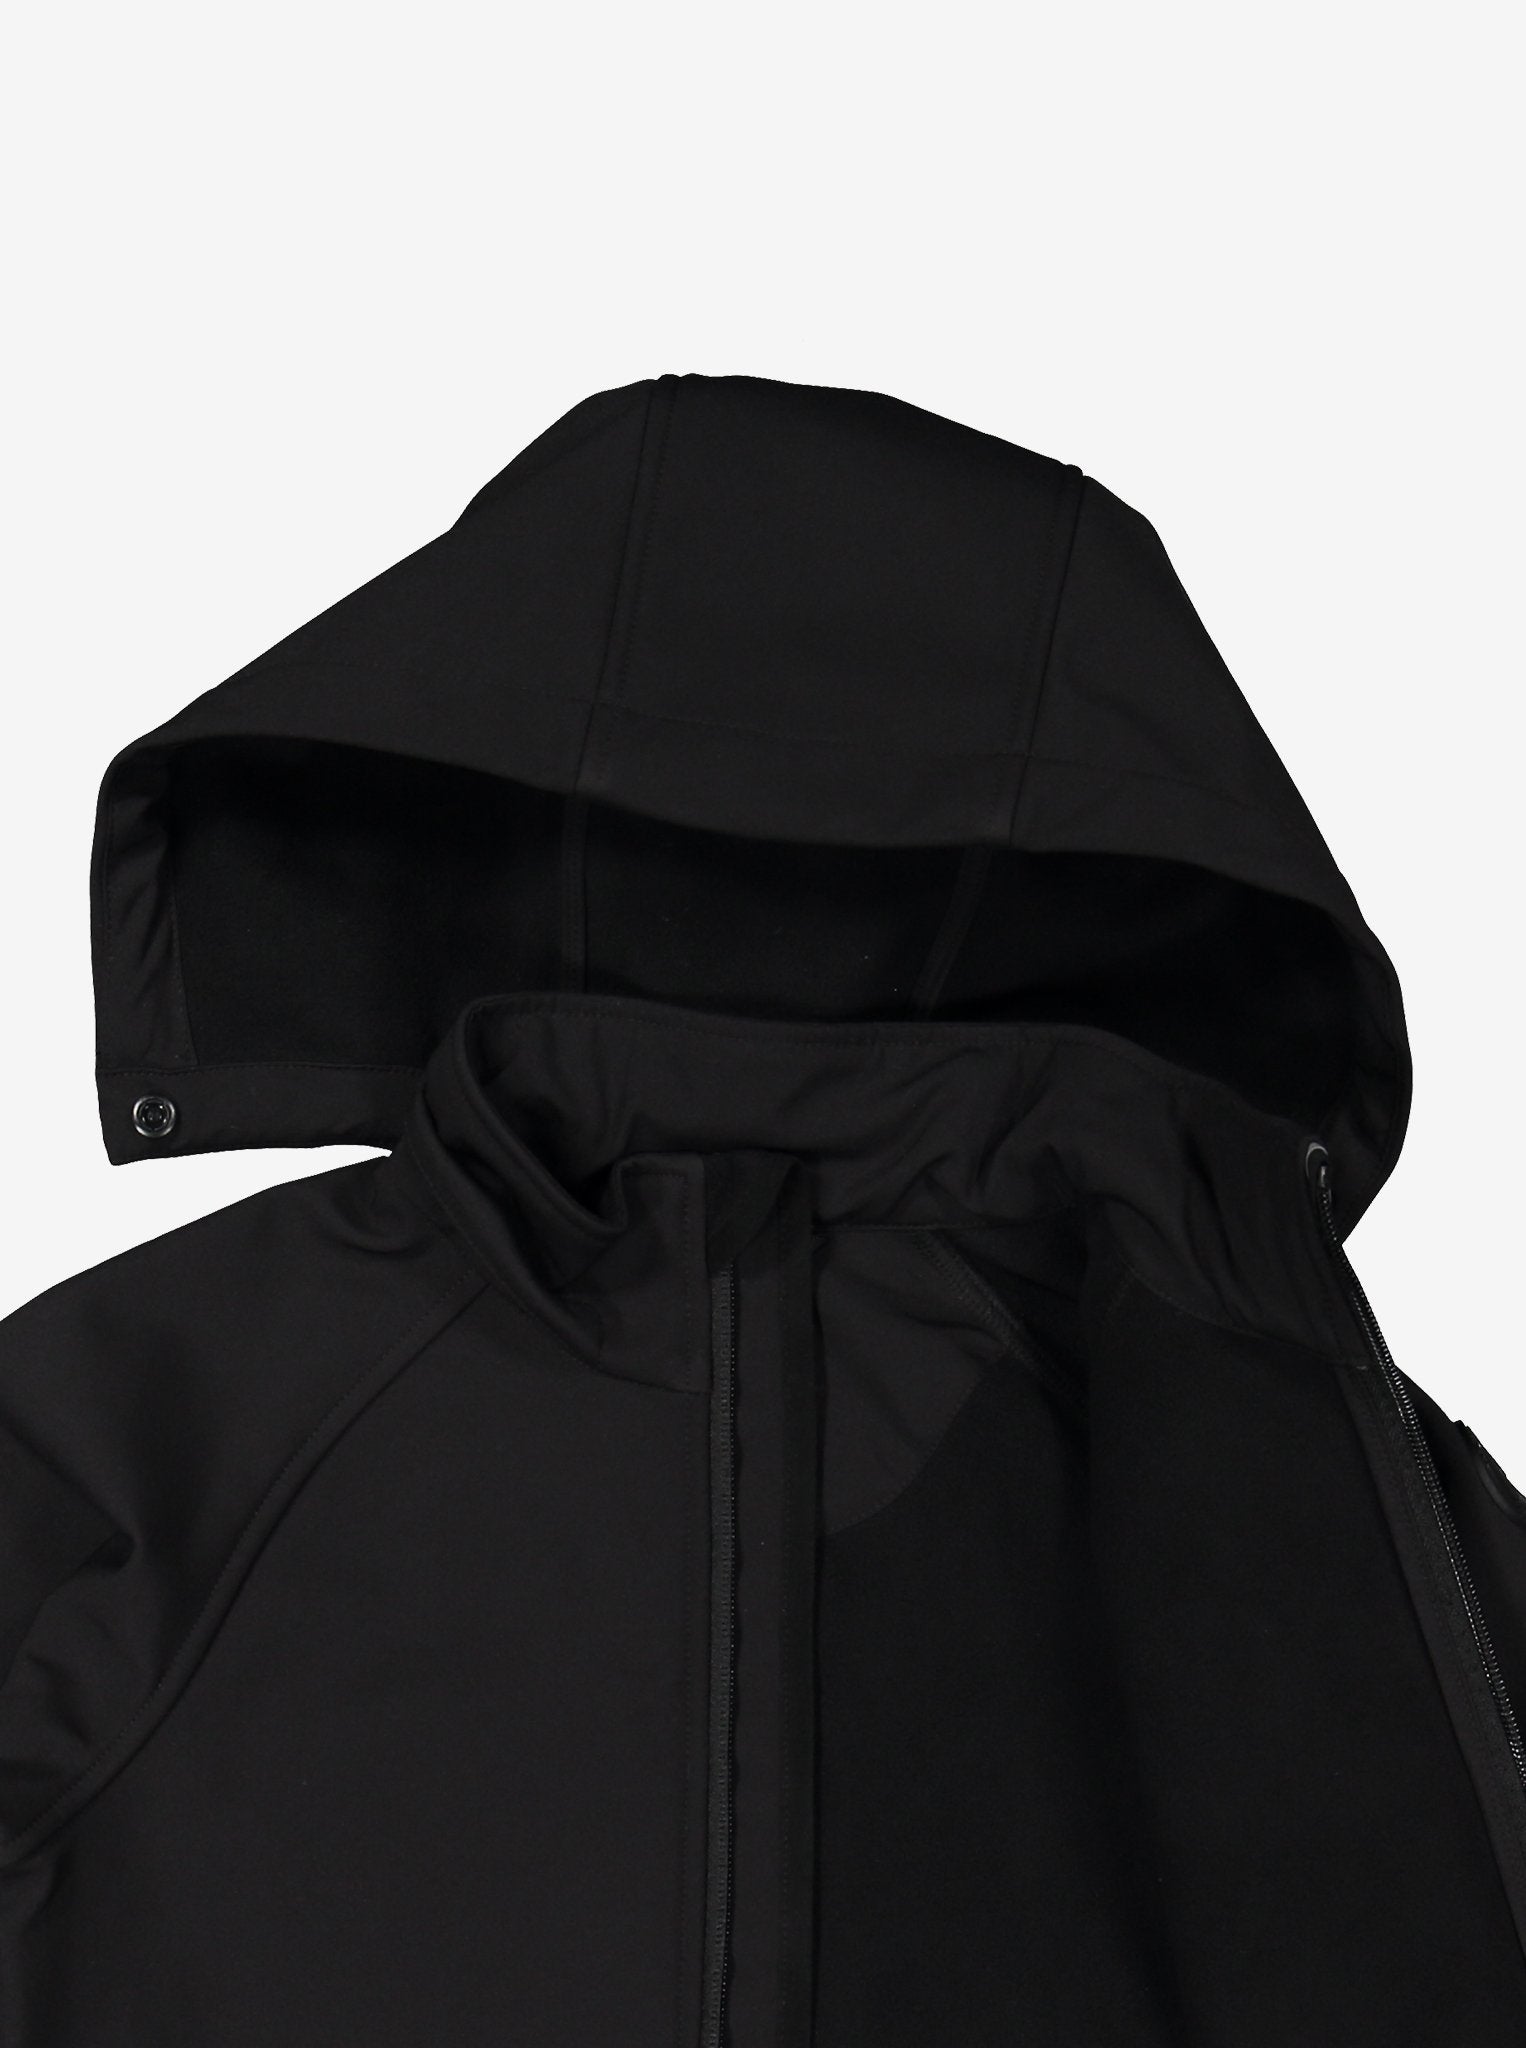   Black Stretch Waterproofs Kids Jacket black, soft warm and comfortable, ethical kids clothes polarn o. pyret 